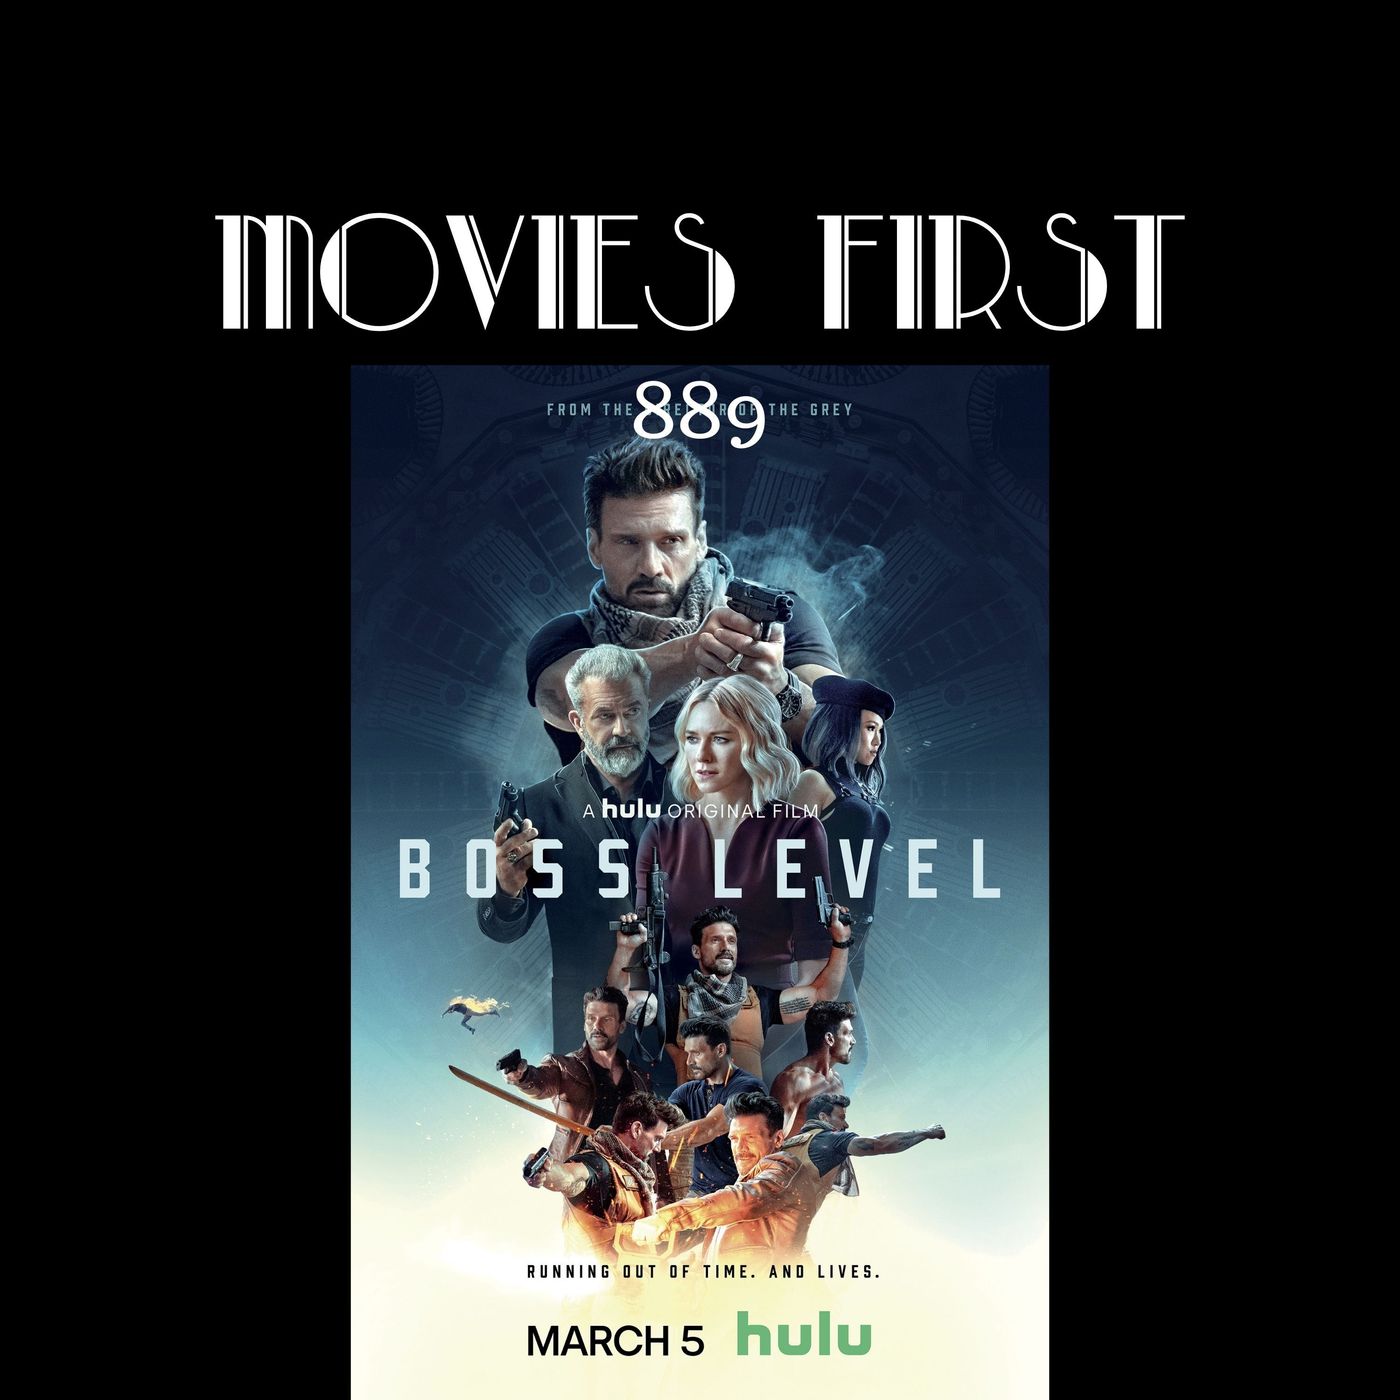 Boss Level (Action, Mystery, Sci-Fi) (the @MoviesFirst review)